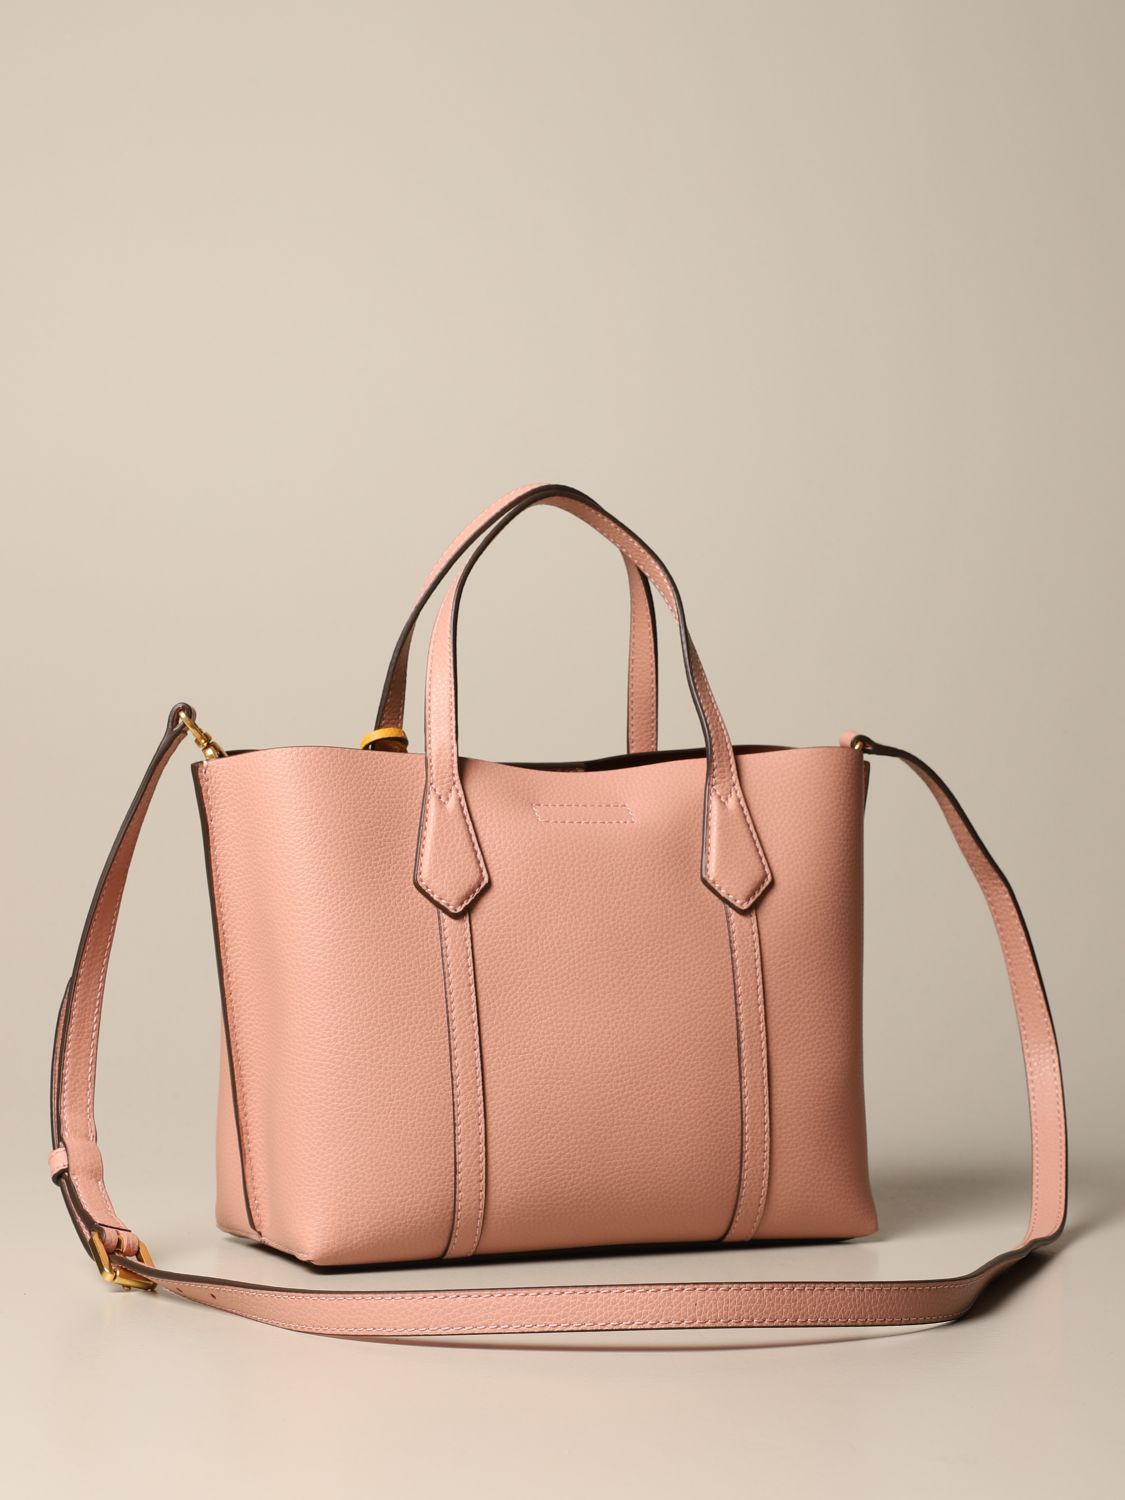 TORY BURCH: Perry bag in textured leather - Pink  Tory Burch tote bags  53245 online at